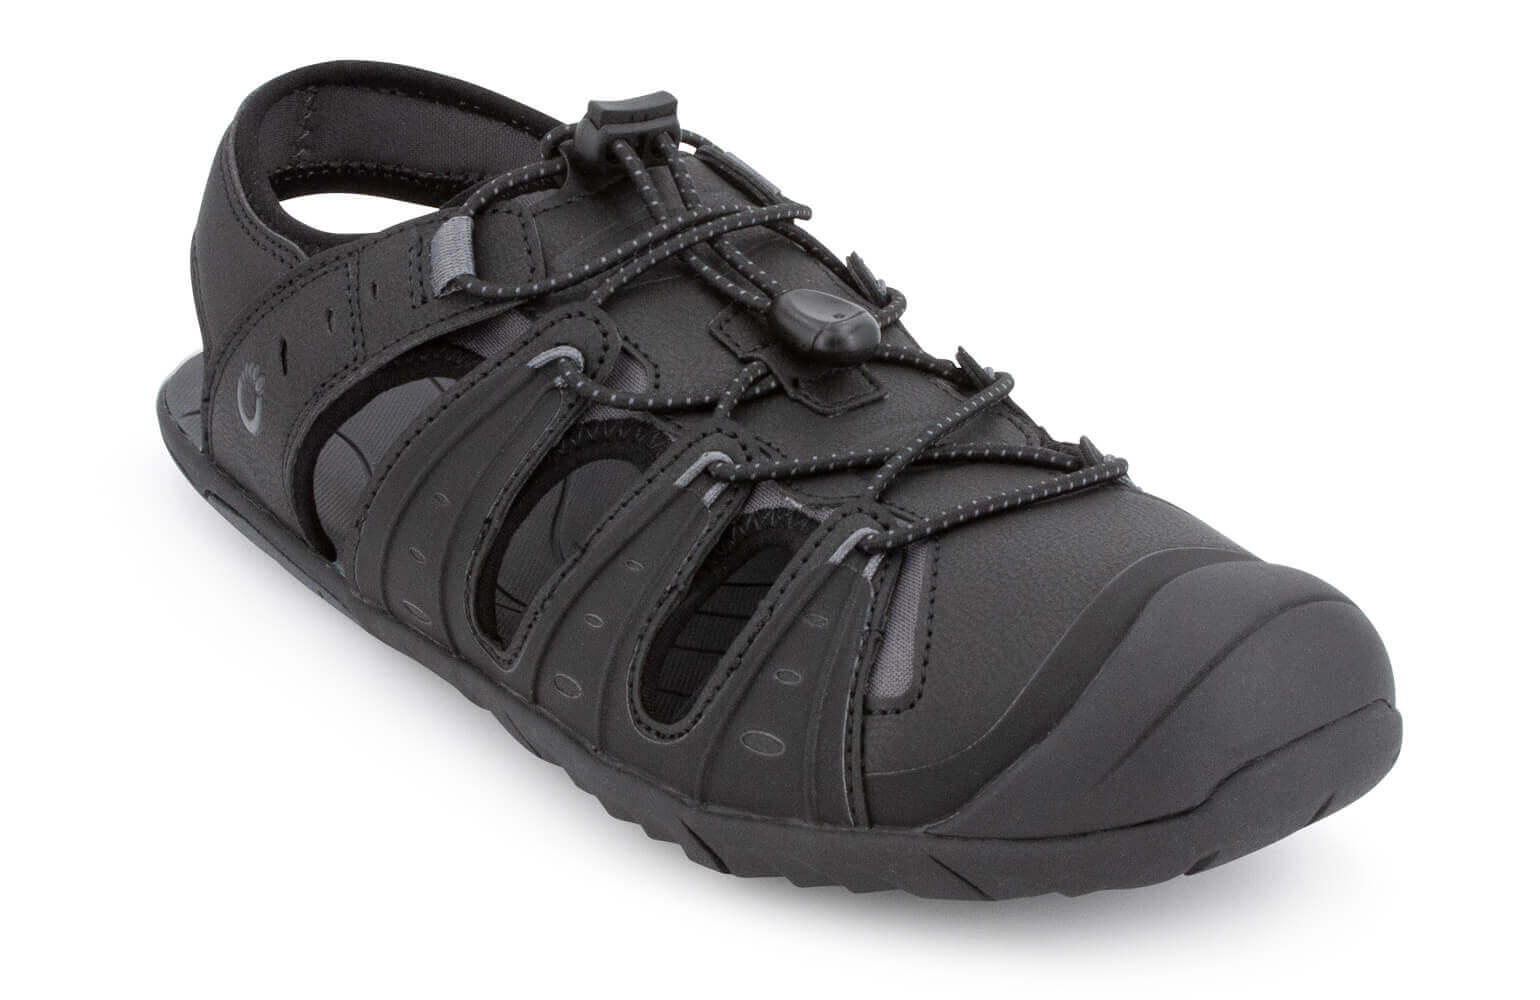 Colorado - Minimalist Water and Trail Shoe from Xero Shoes - Men